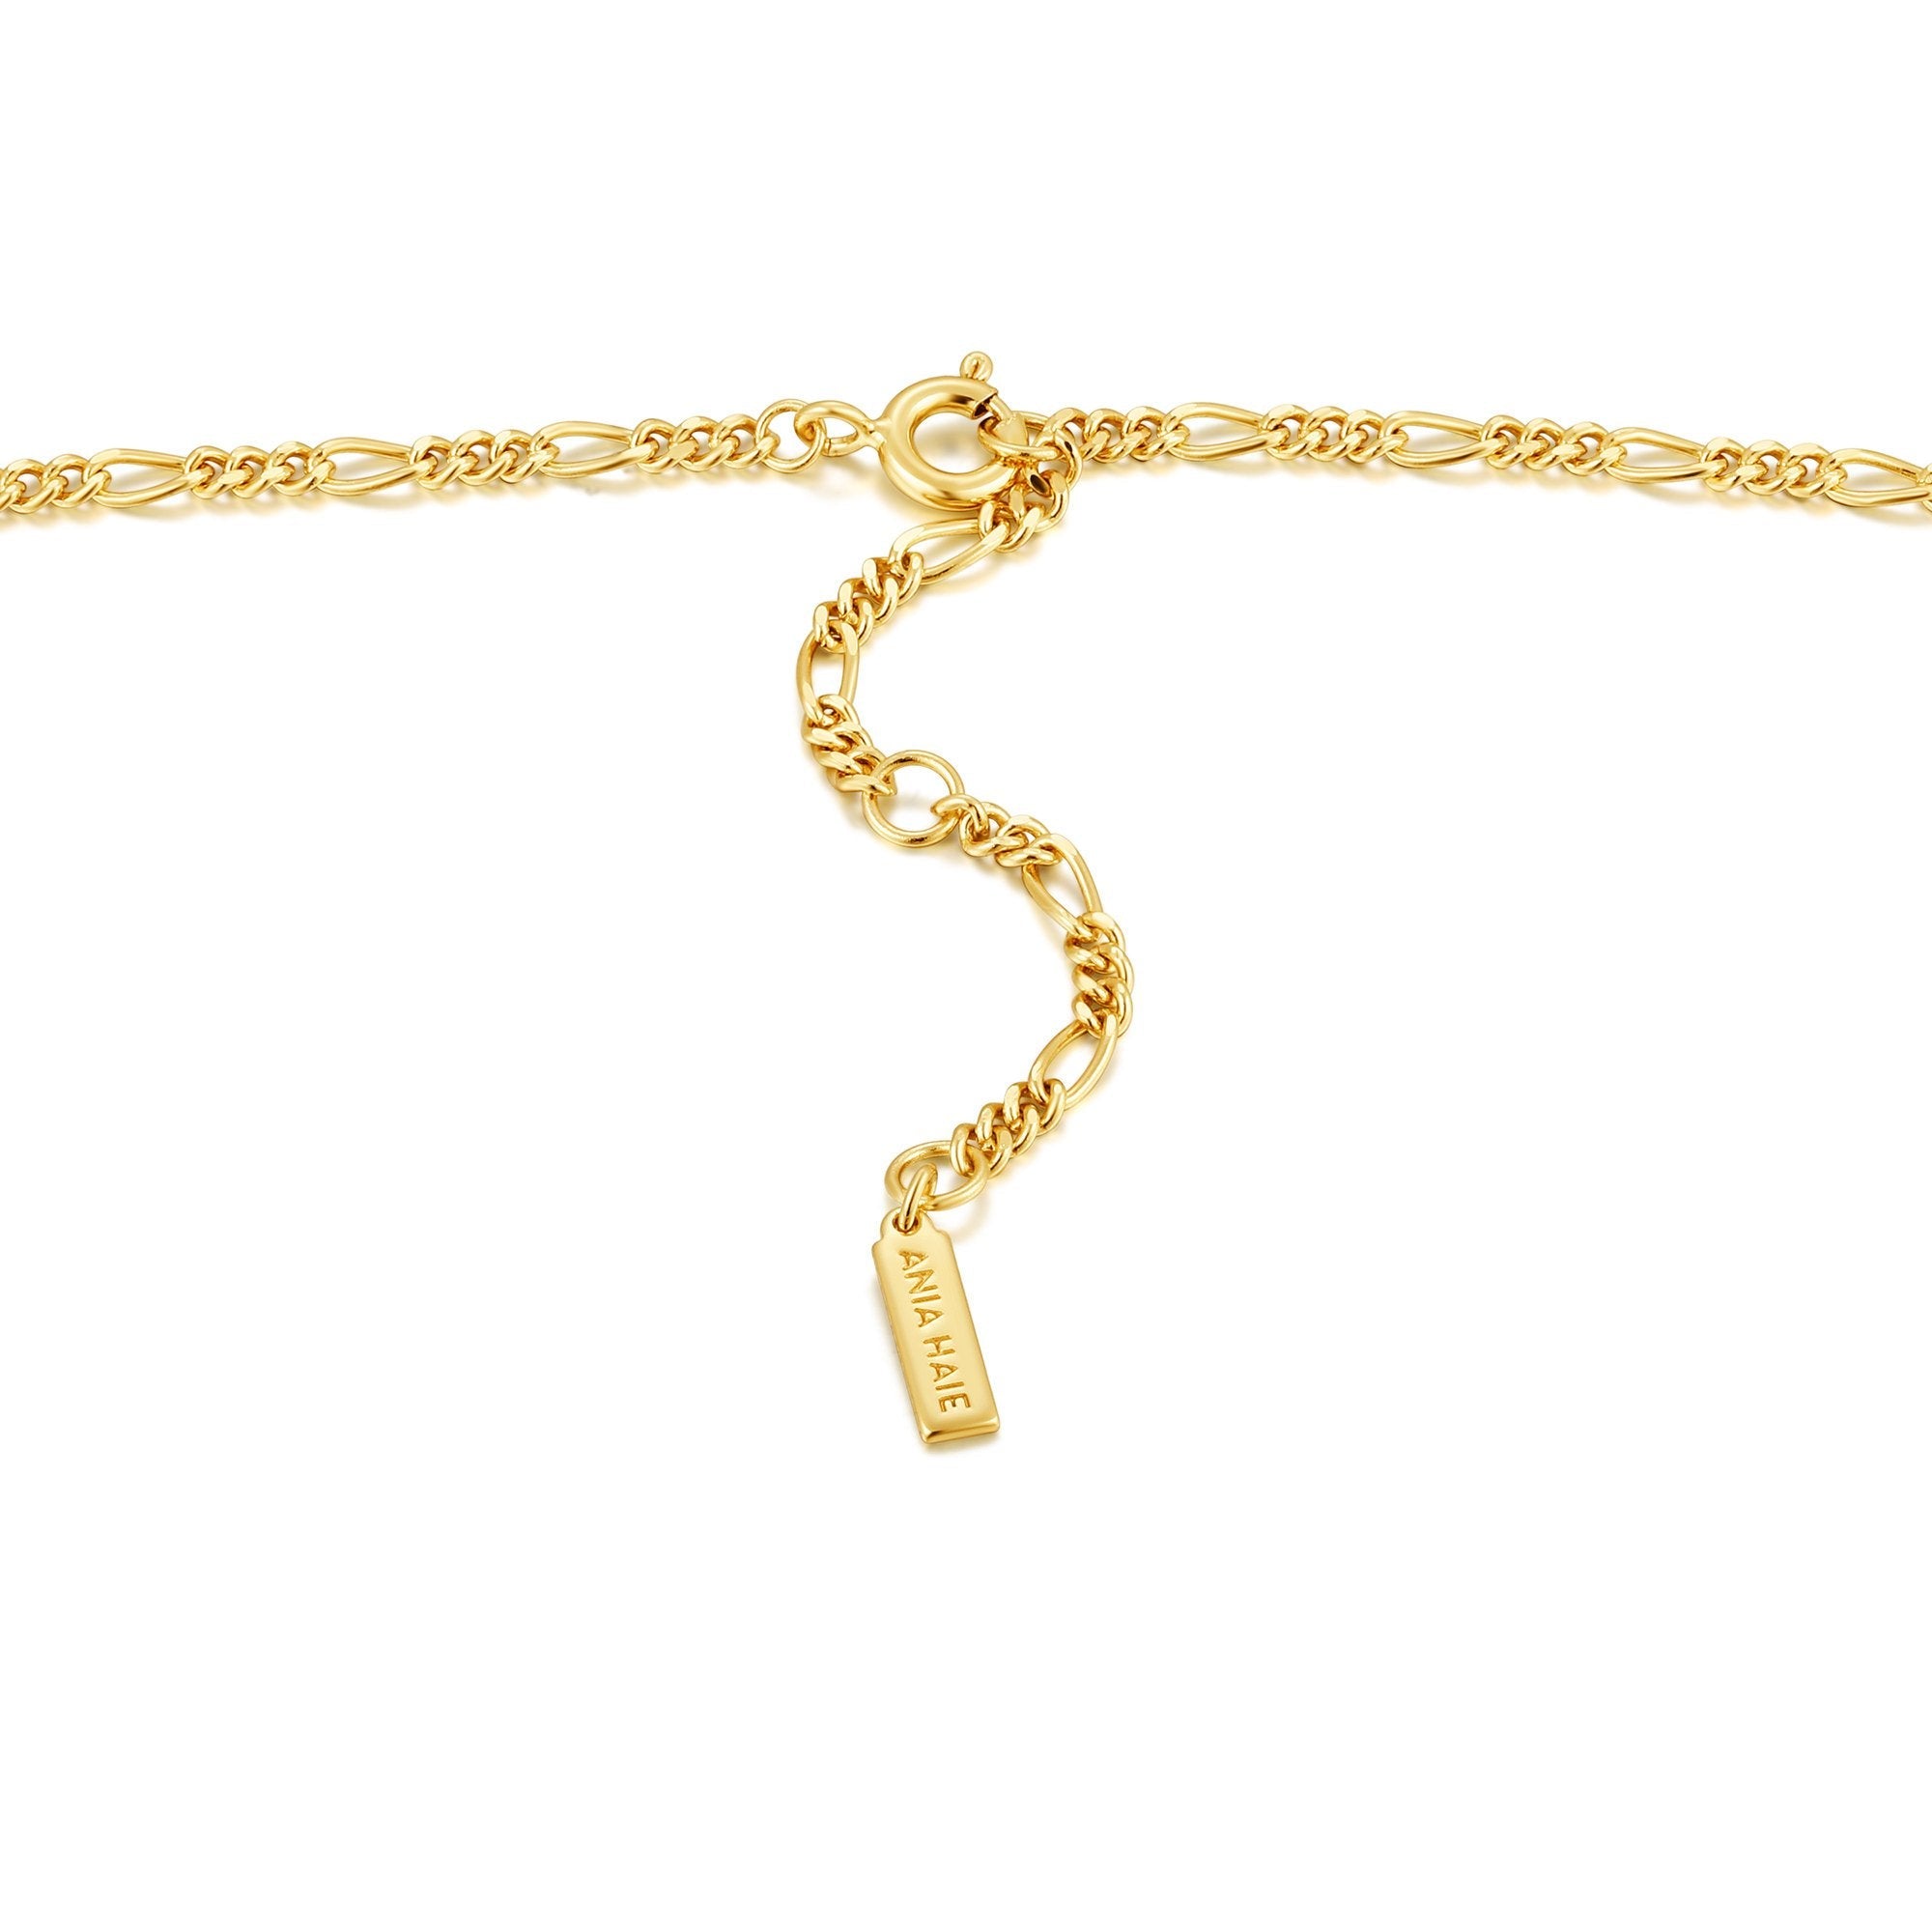 Ania Haie Compass Emblem Gold Figaro Chain Necklace